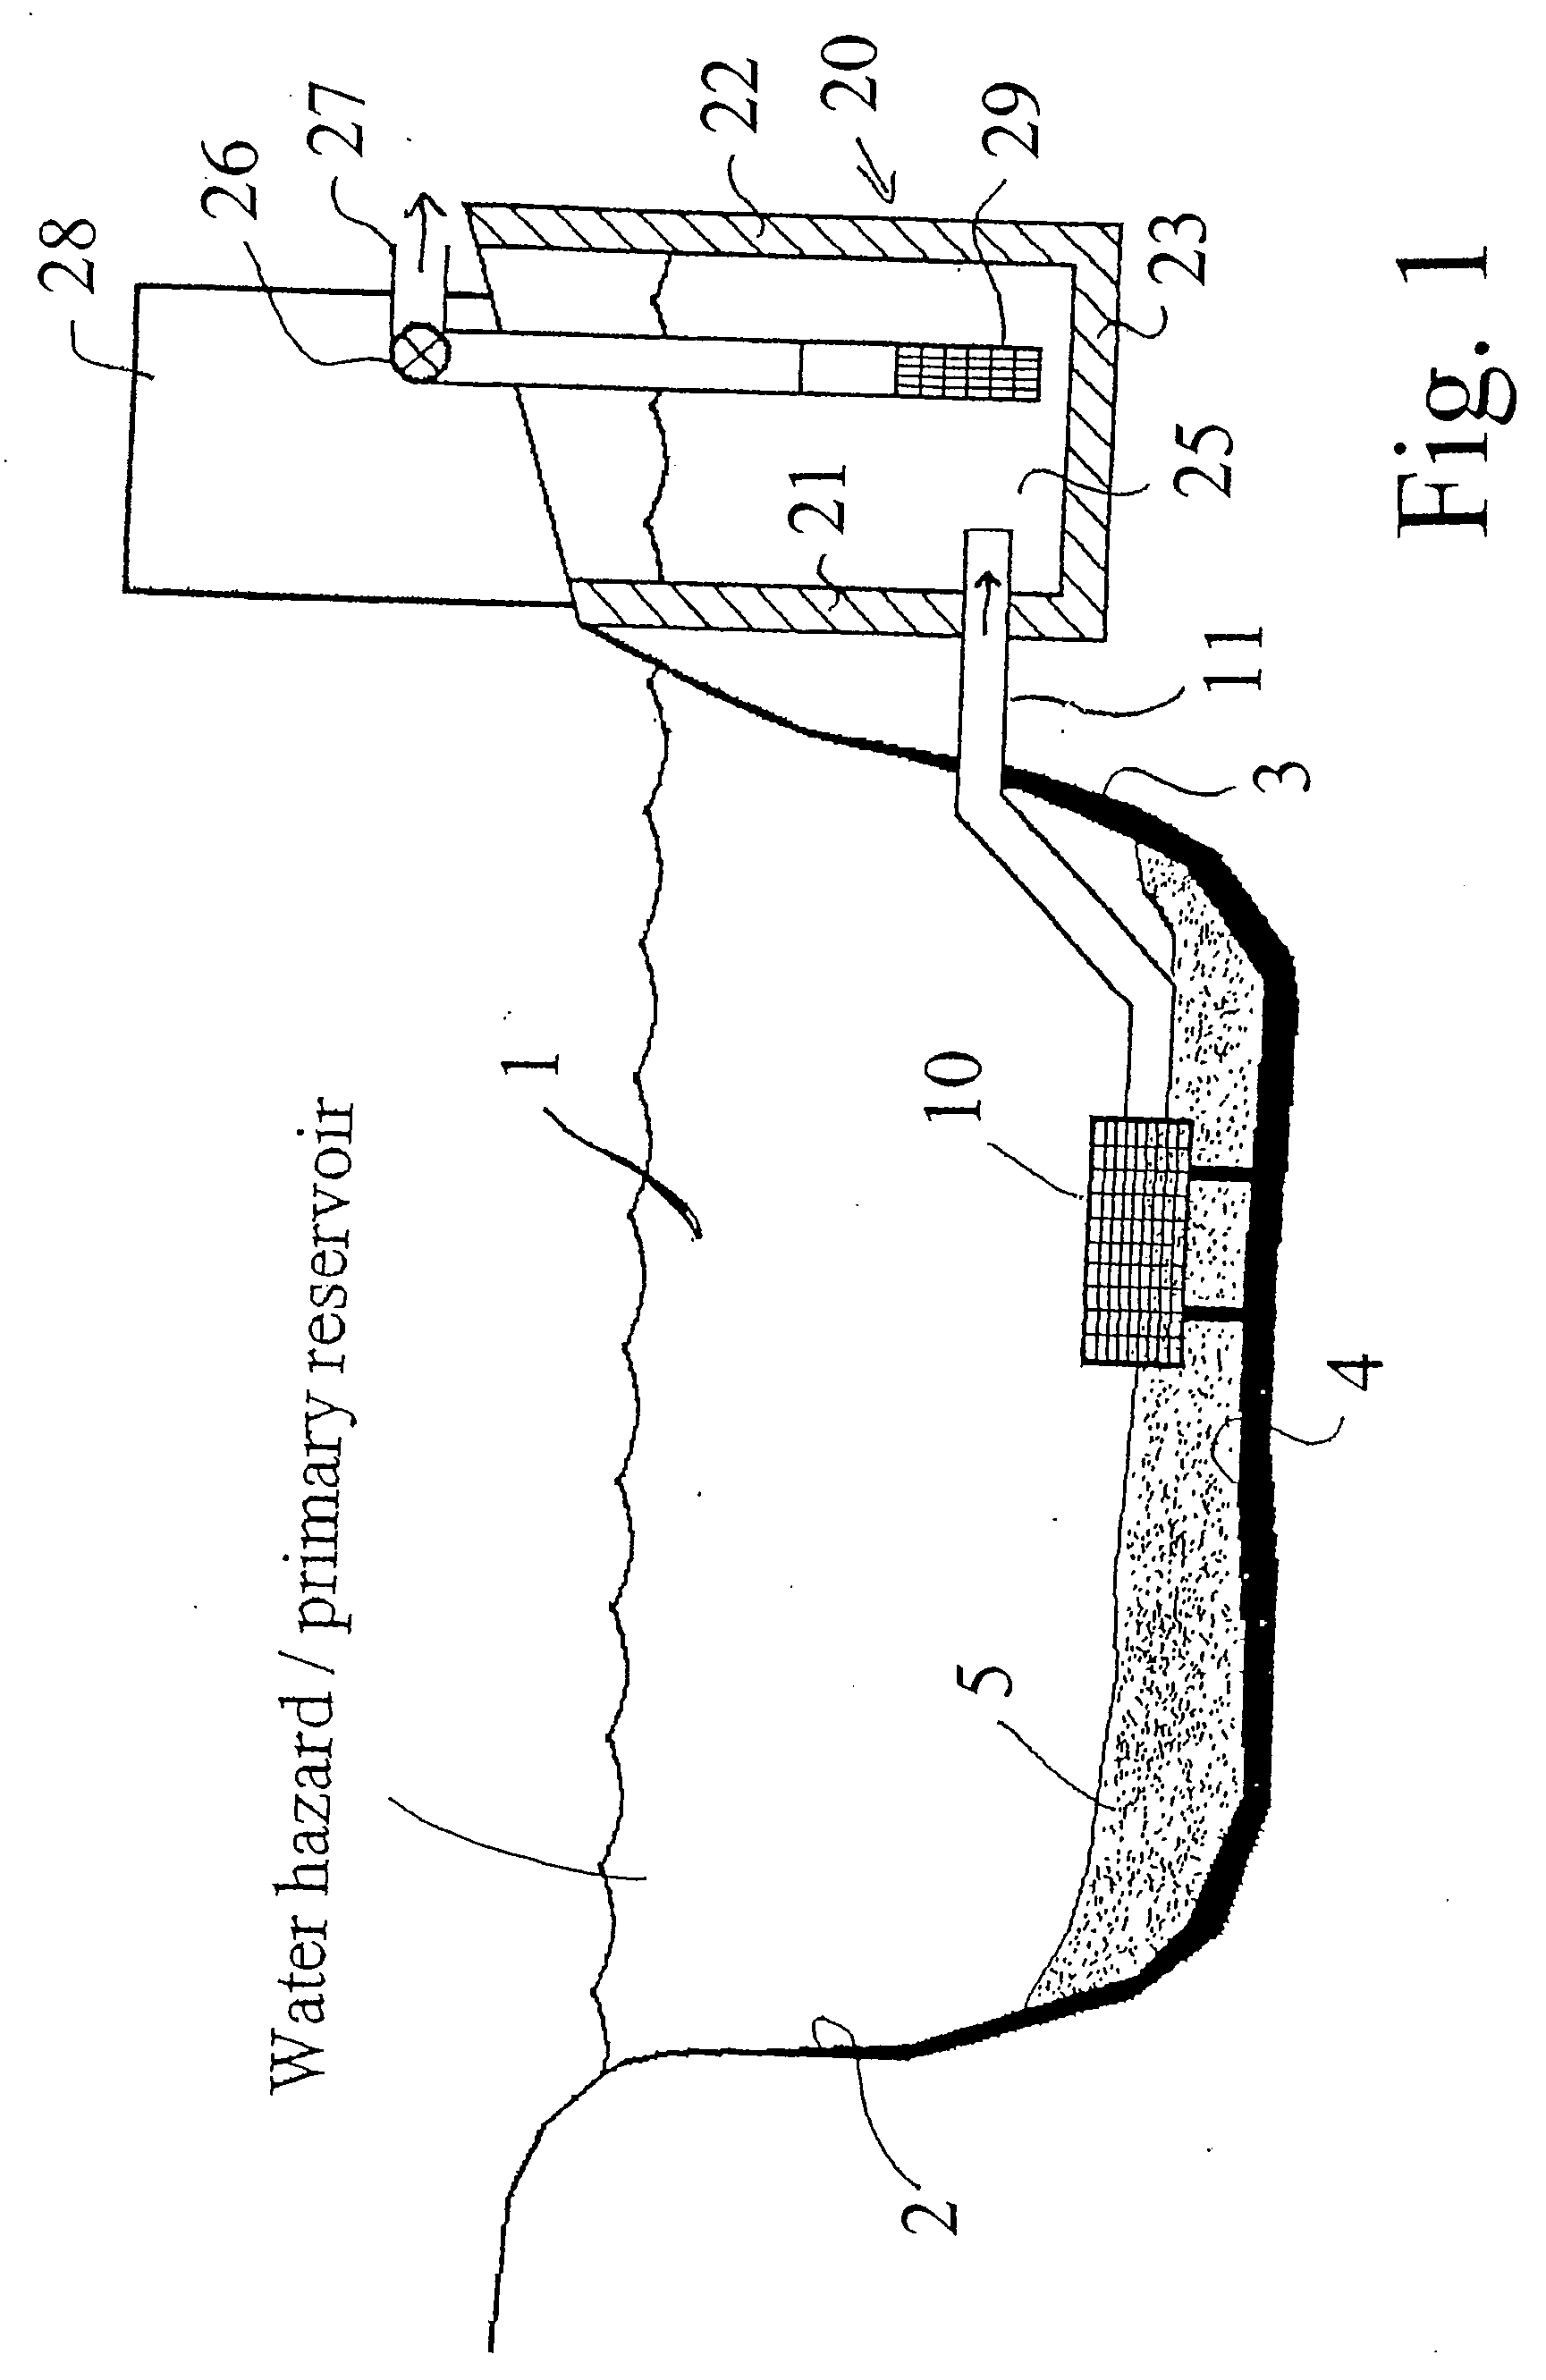 Method and apparatus for remediation and prevention of fouling of recirculating water systems by detritus and other debris